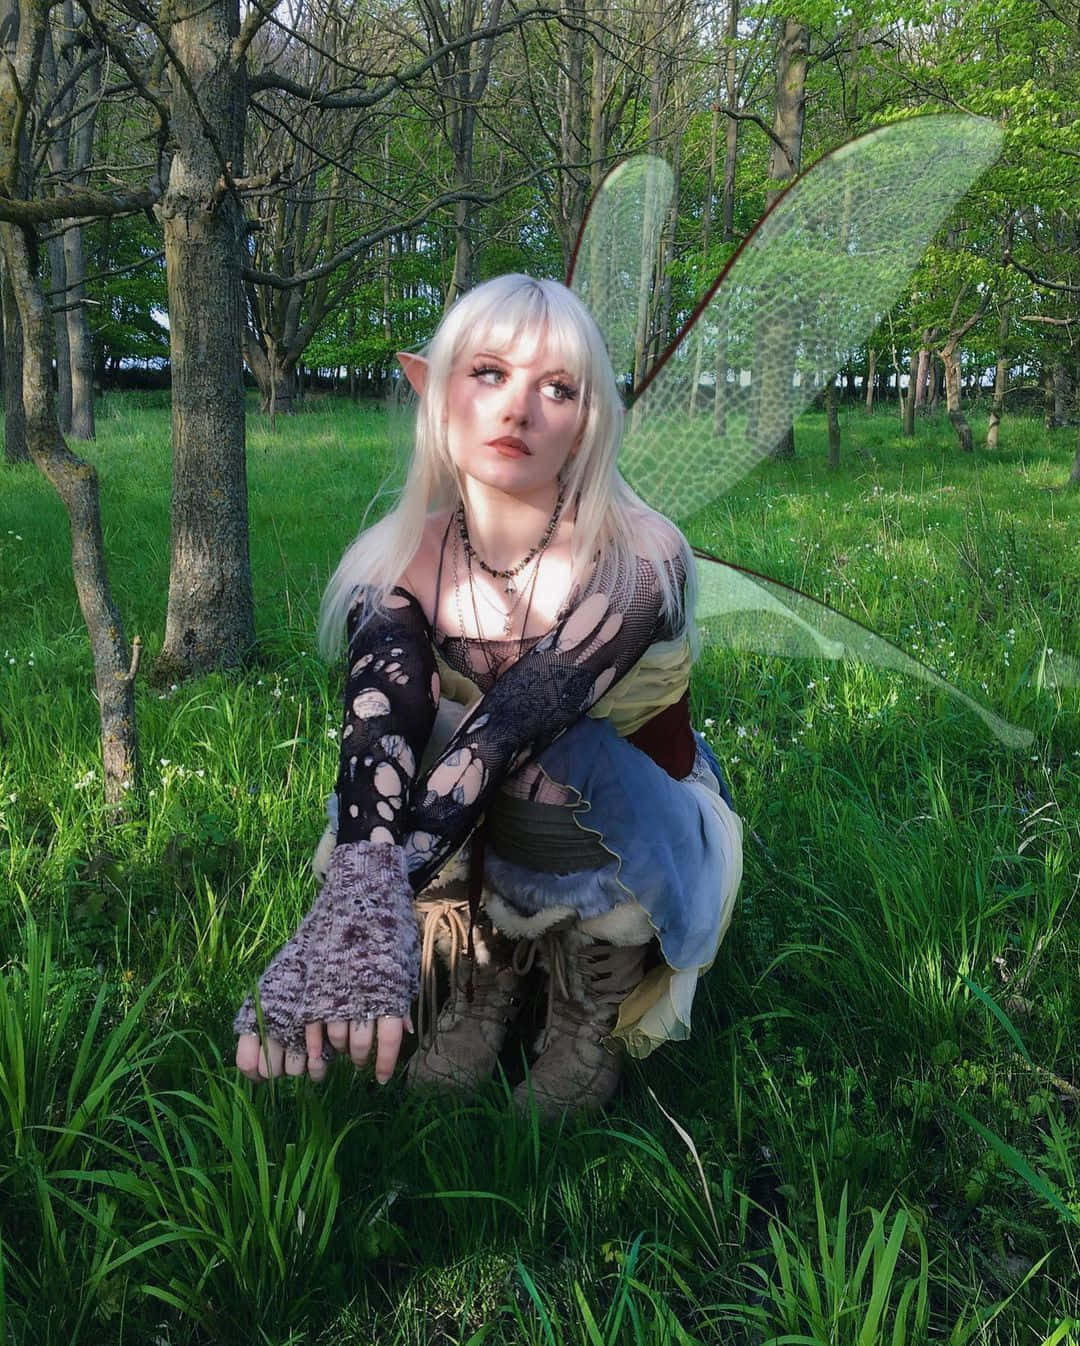 A Woman In A Fairy Costume Crouching In The Grass